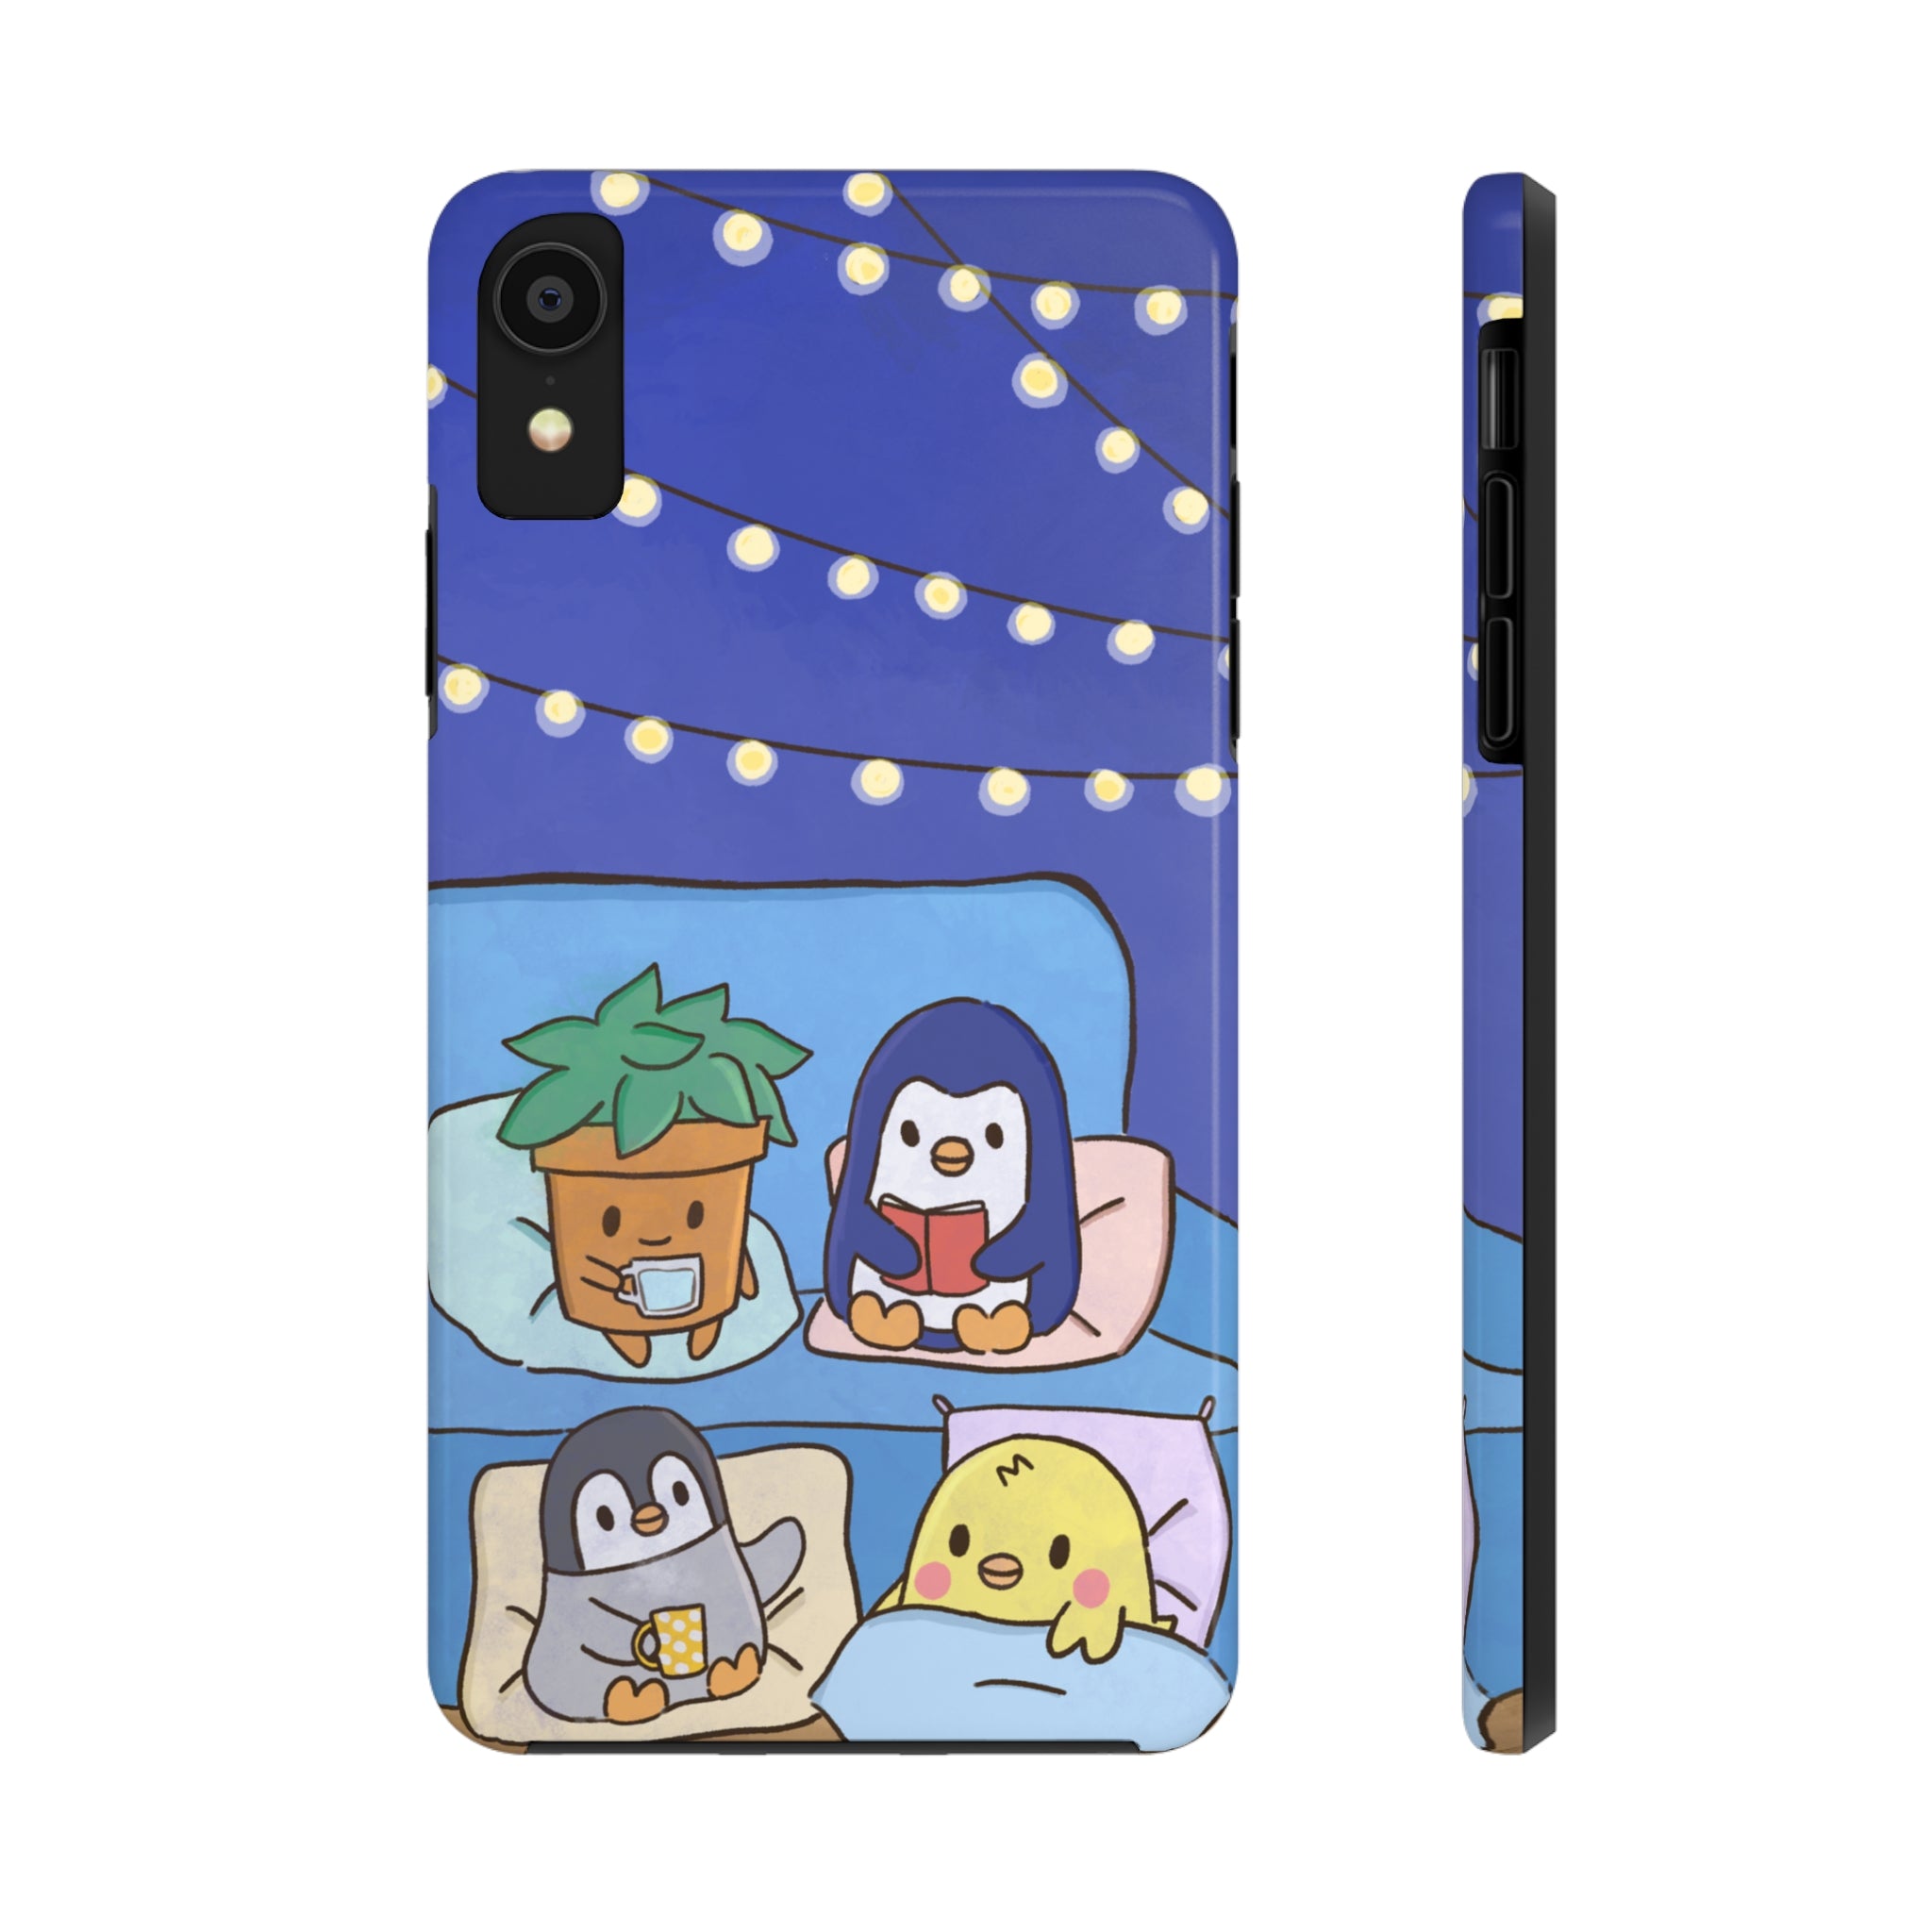 Comfy and Cozy Blue iPhone Case